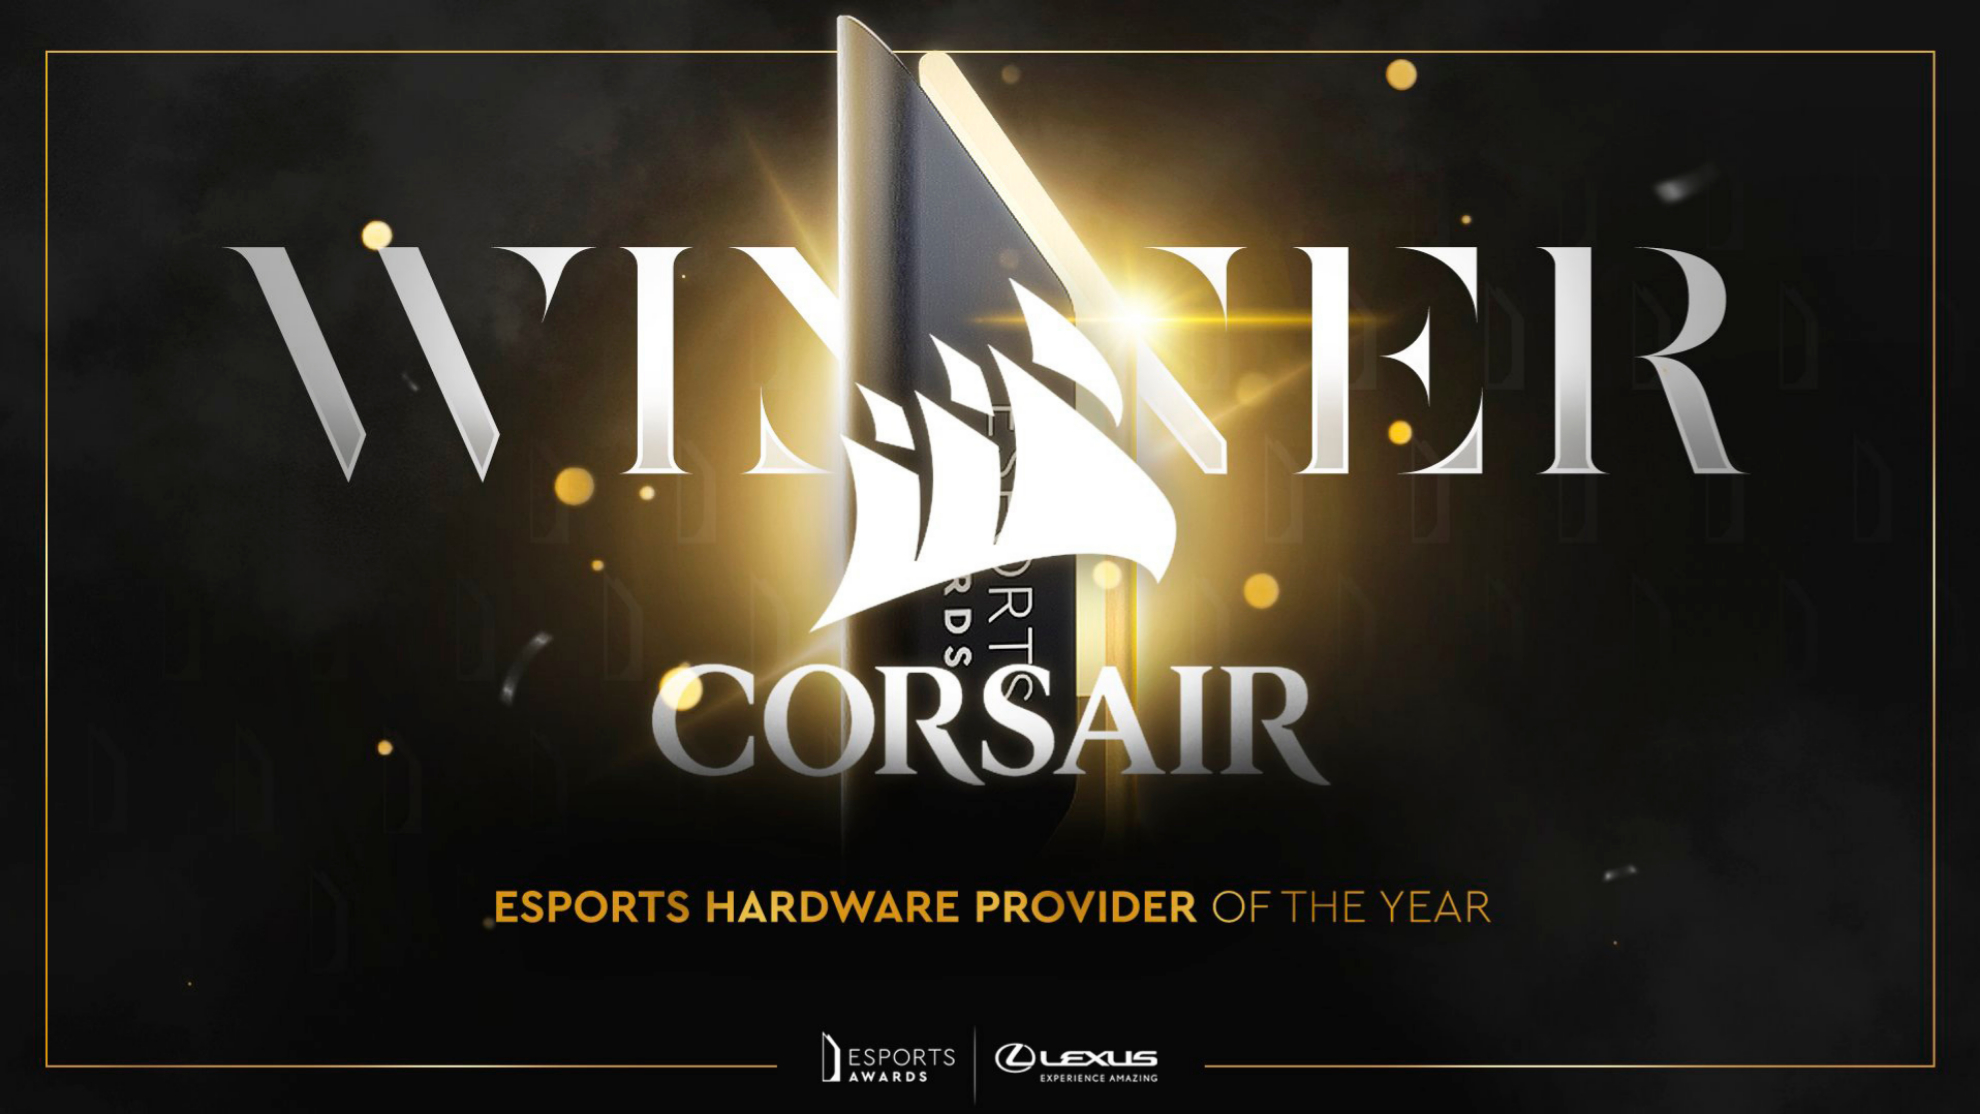 Esports Hardware Provider of the Year